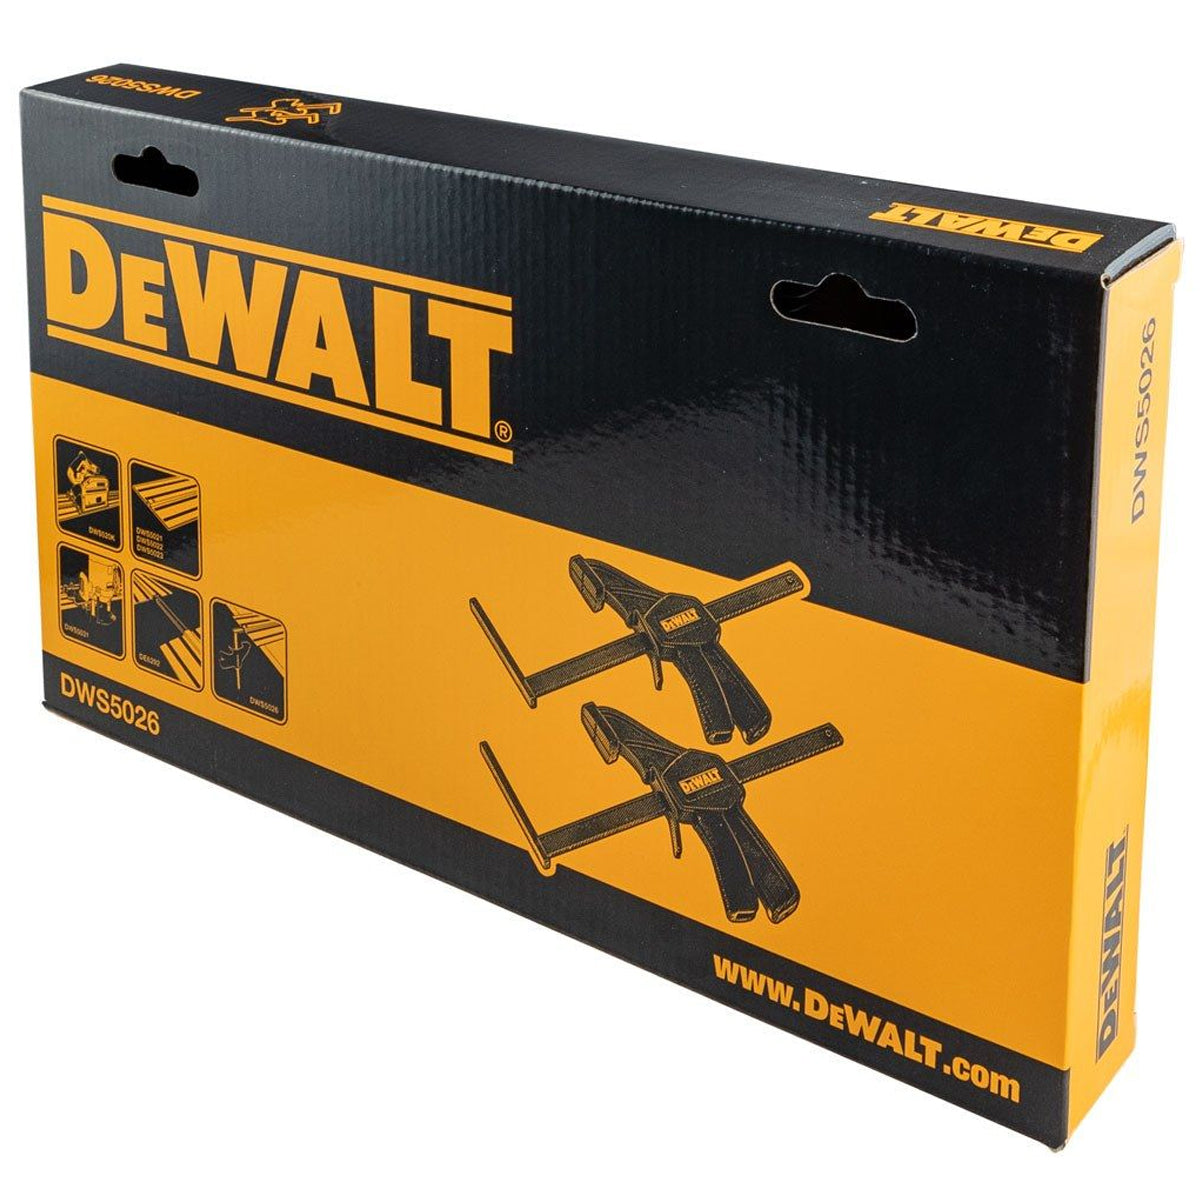 DeWalt DWS5026-XJ Plunge Saw Clamp Twin Pack Guide Rail – Excel Tools